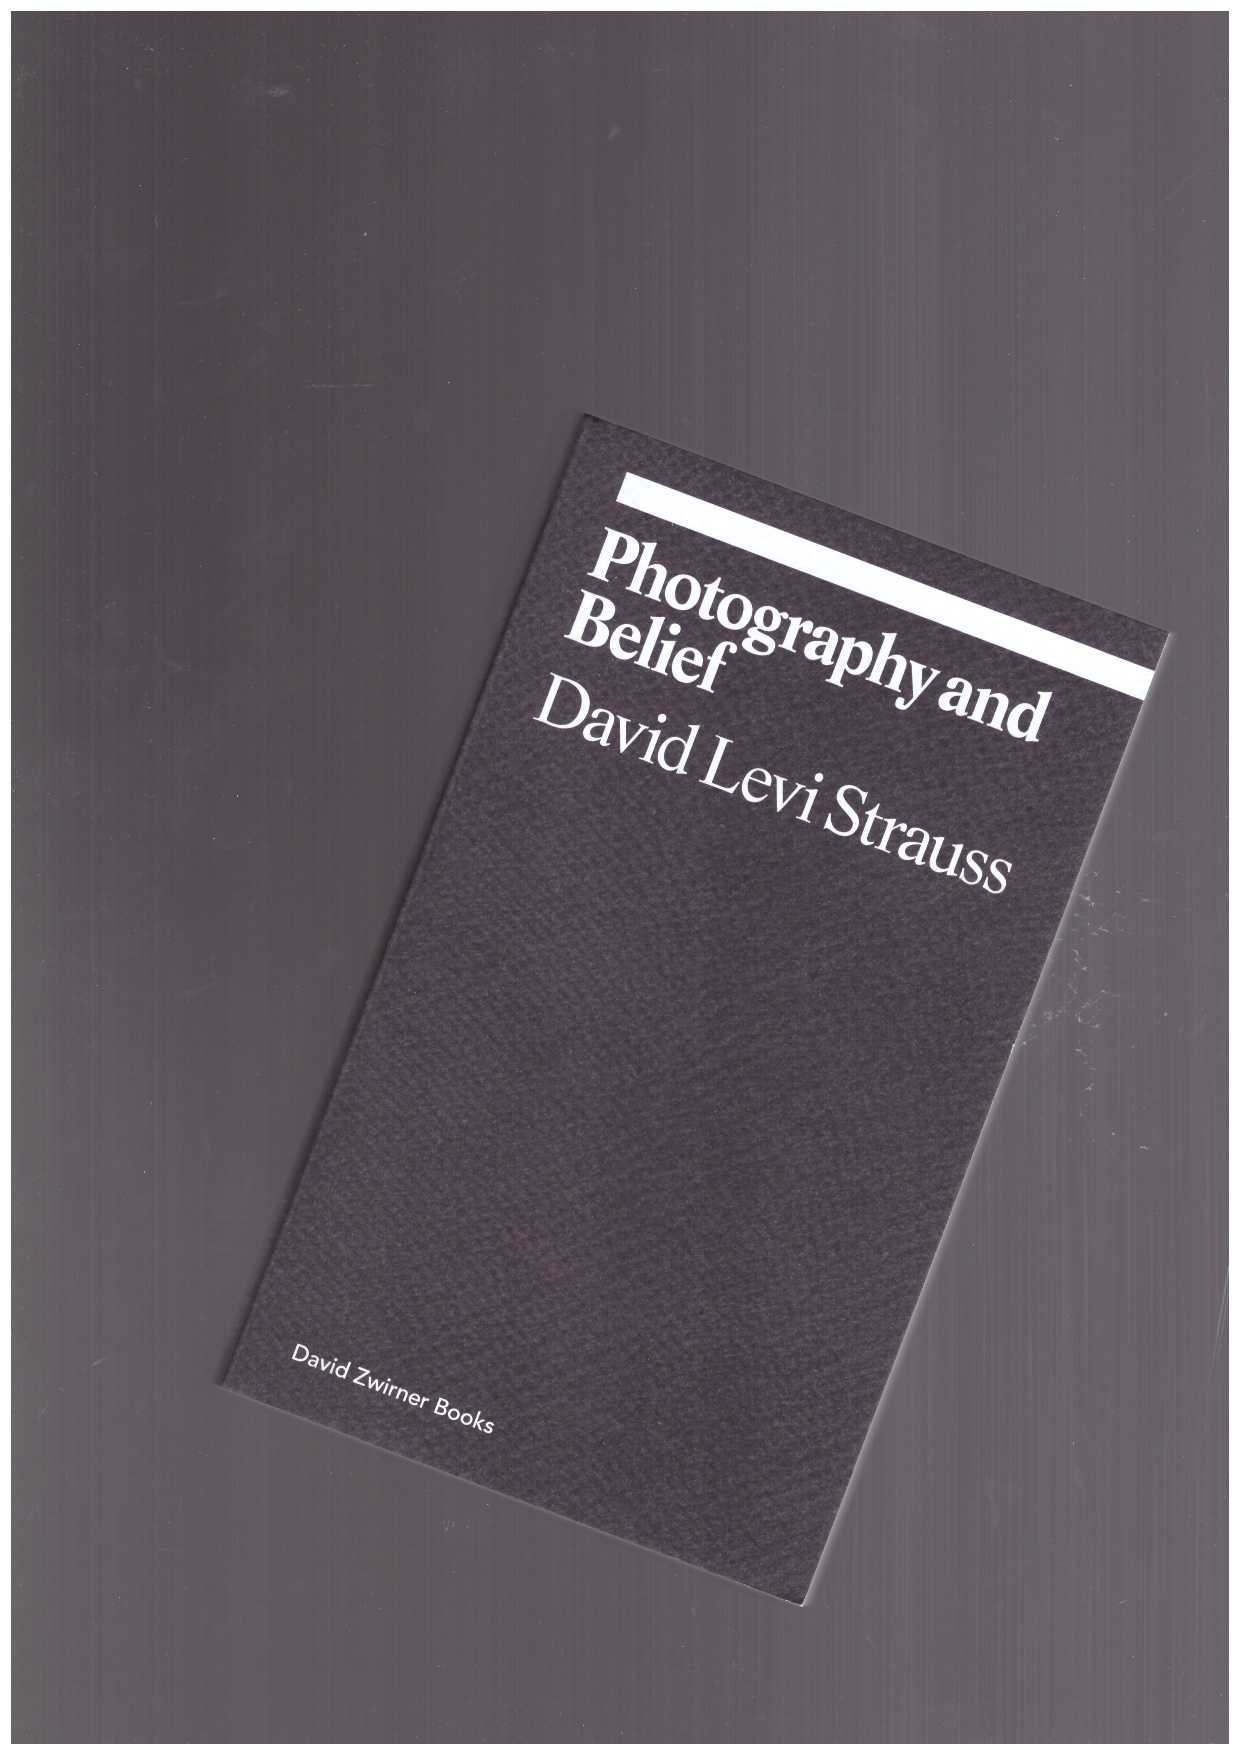 LEVI STRAUSS, David - Photography and Belief